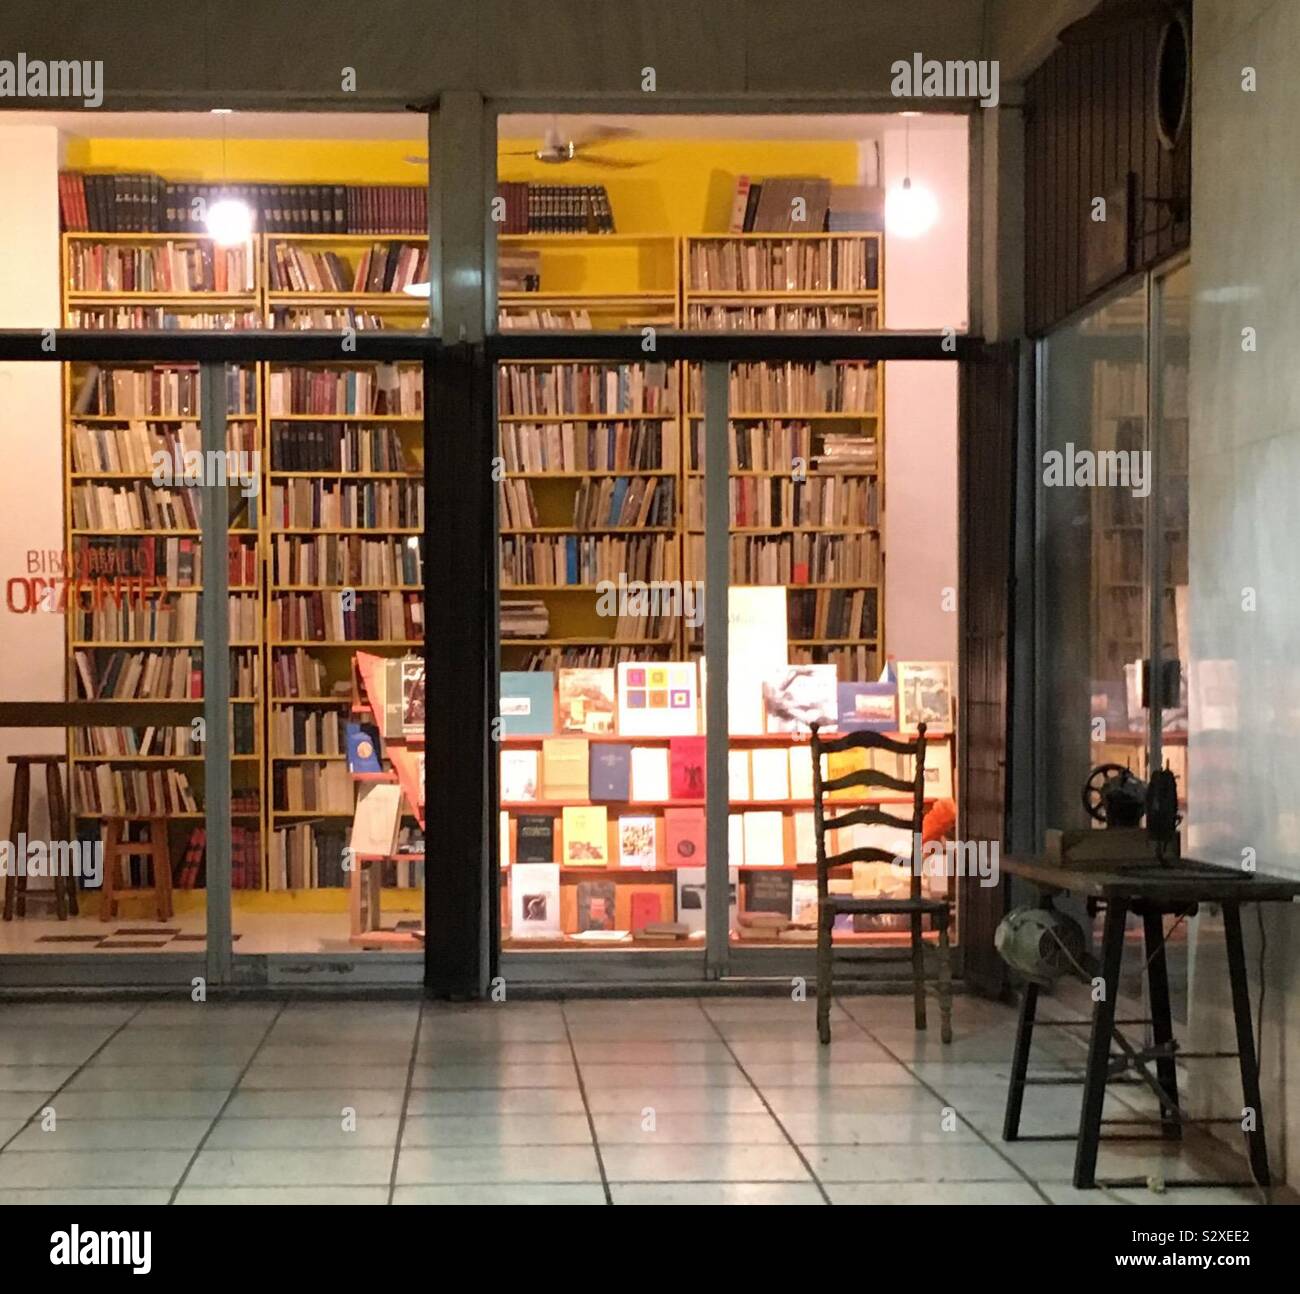 Bookshop in an arcade (stoa) on Akademias St. in Athens, Greece. This area is the academic quarter of Athens with many bookshops near the University of Athens and the National Technical University. Stock Photo